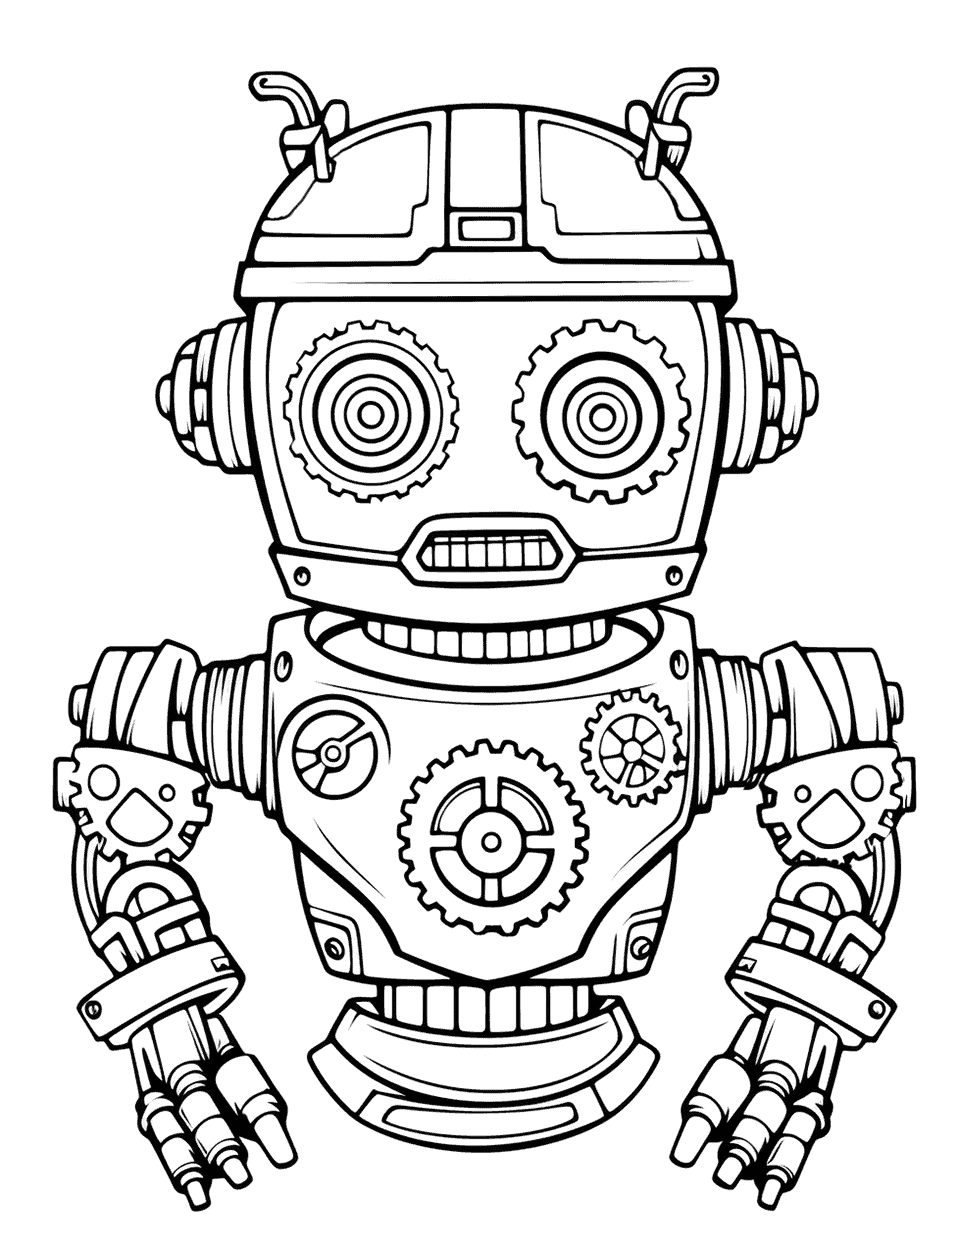 Steampunk Robot with Gears Coloring Page - A robot adorned with steampunk-style gears and pipes.